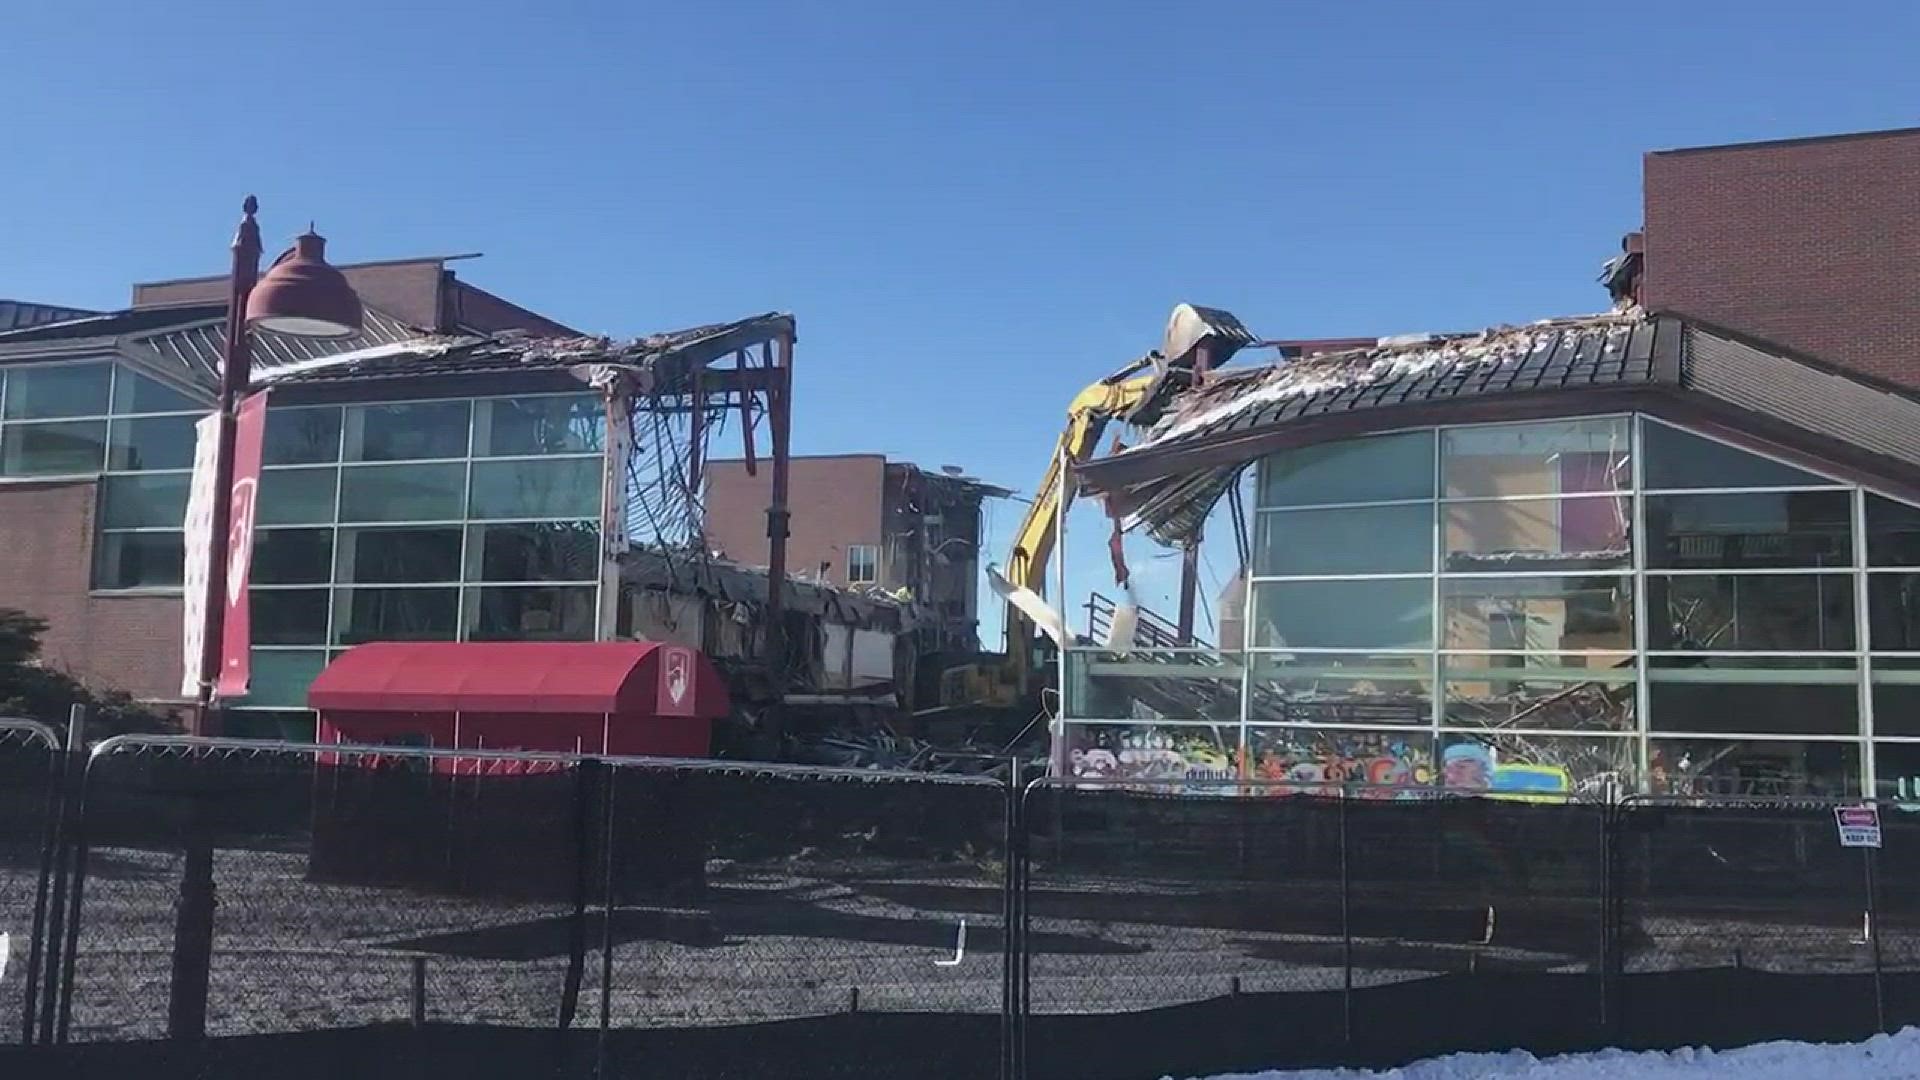 An excavator tears down the University of Denver's Driscoll Student Center as part of the university's $143 million plan to overhaul the campus